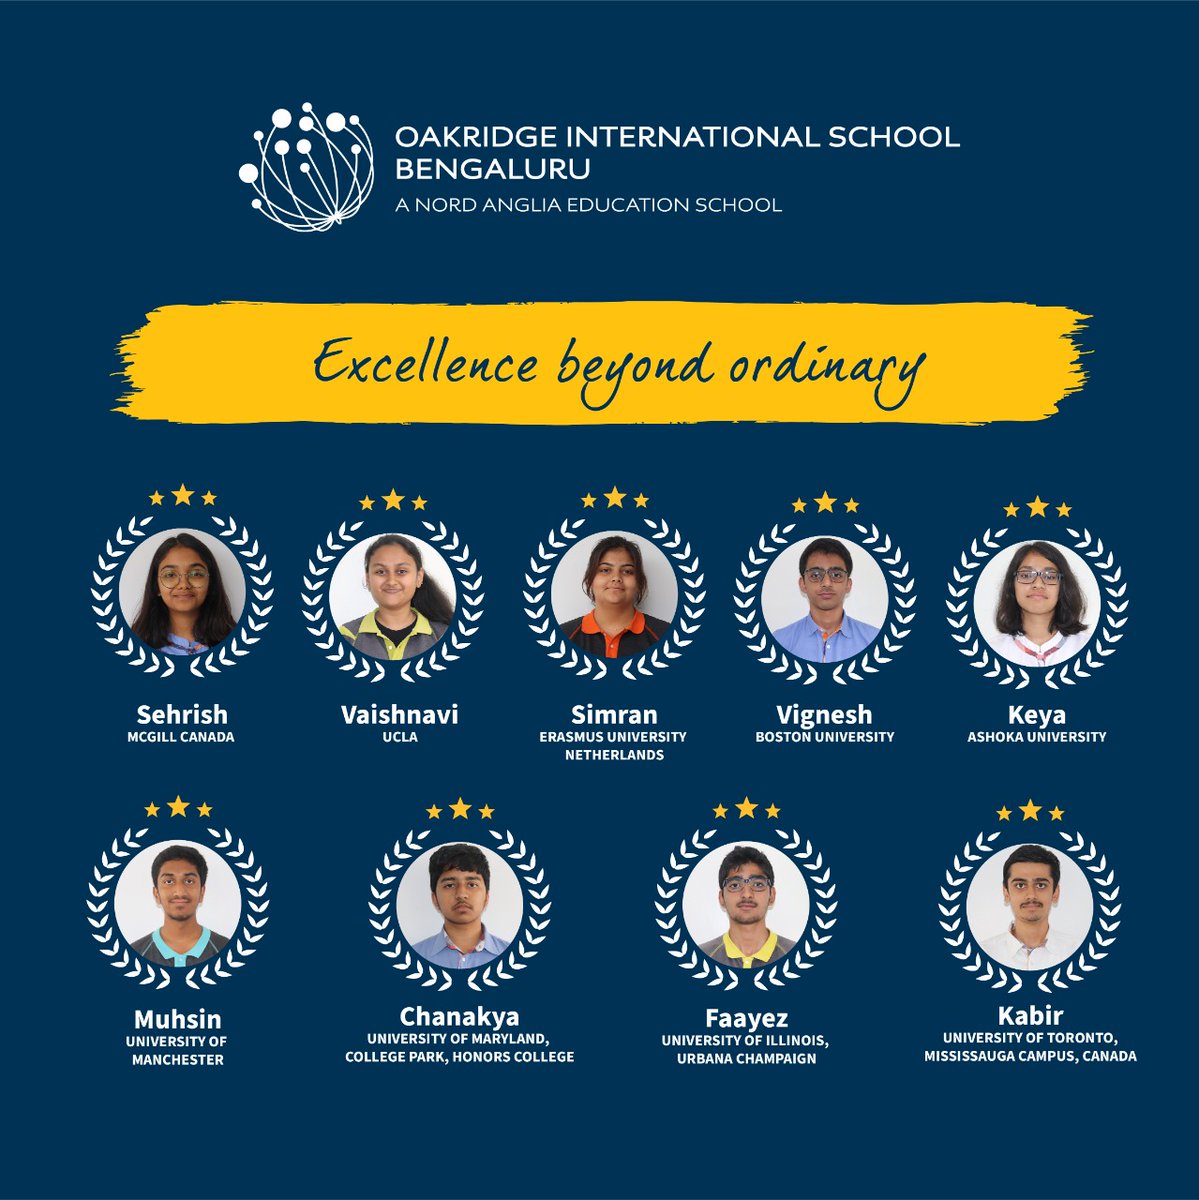 University Placements for our IBDP Topper students has been exemplary! We are extremely proud of them and wish them all the best for their future.
#OakridgeInternationalSchool #nordangliaschool #NAEBeAmbitious #UniversityPlacements